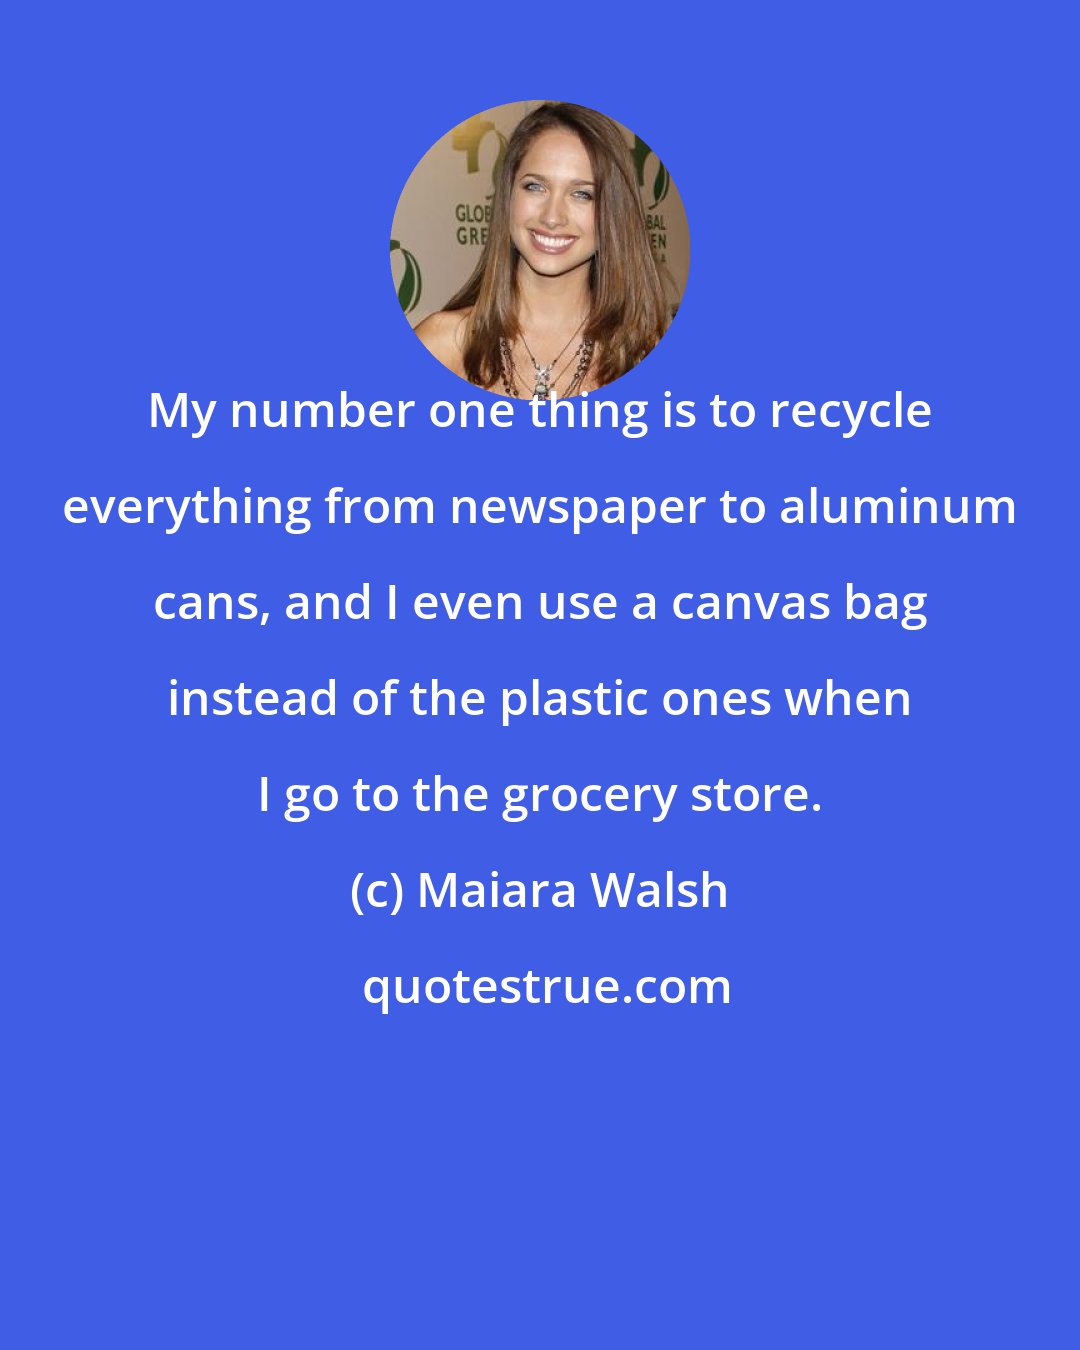 Maiara Walsh: My number one thing is to recycle everything from newspaper to aluminum cans, and I even use a canvas bag instead of the plastic ones when I go to the grocery store.